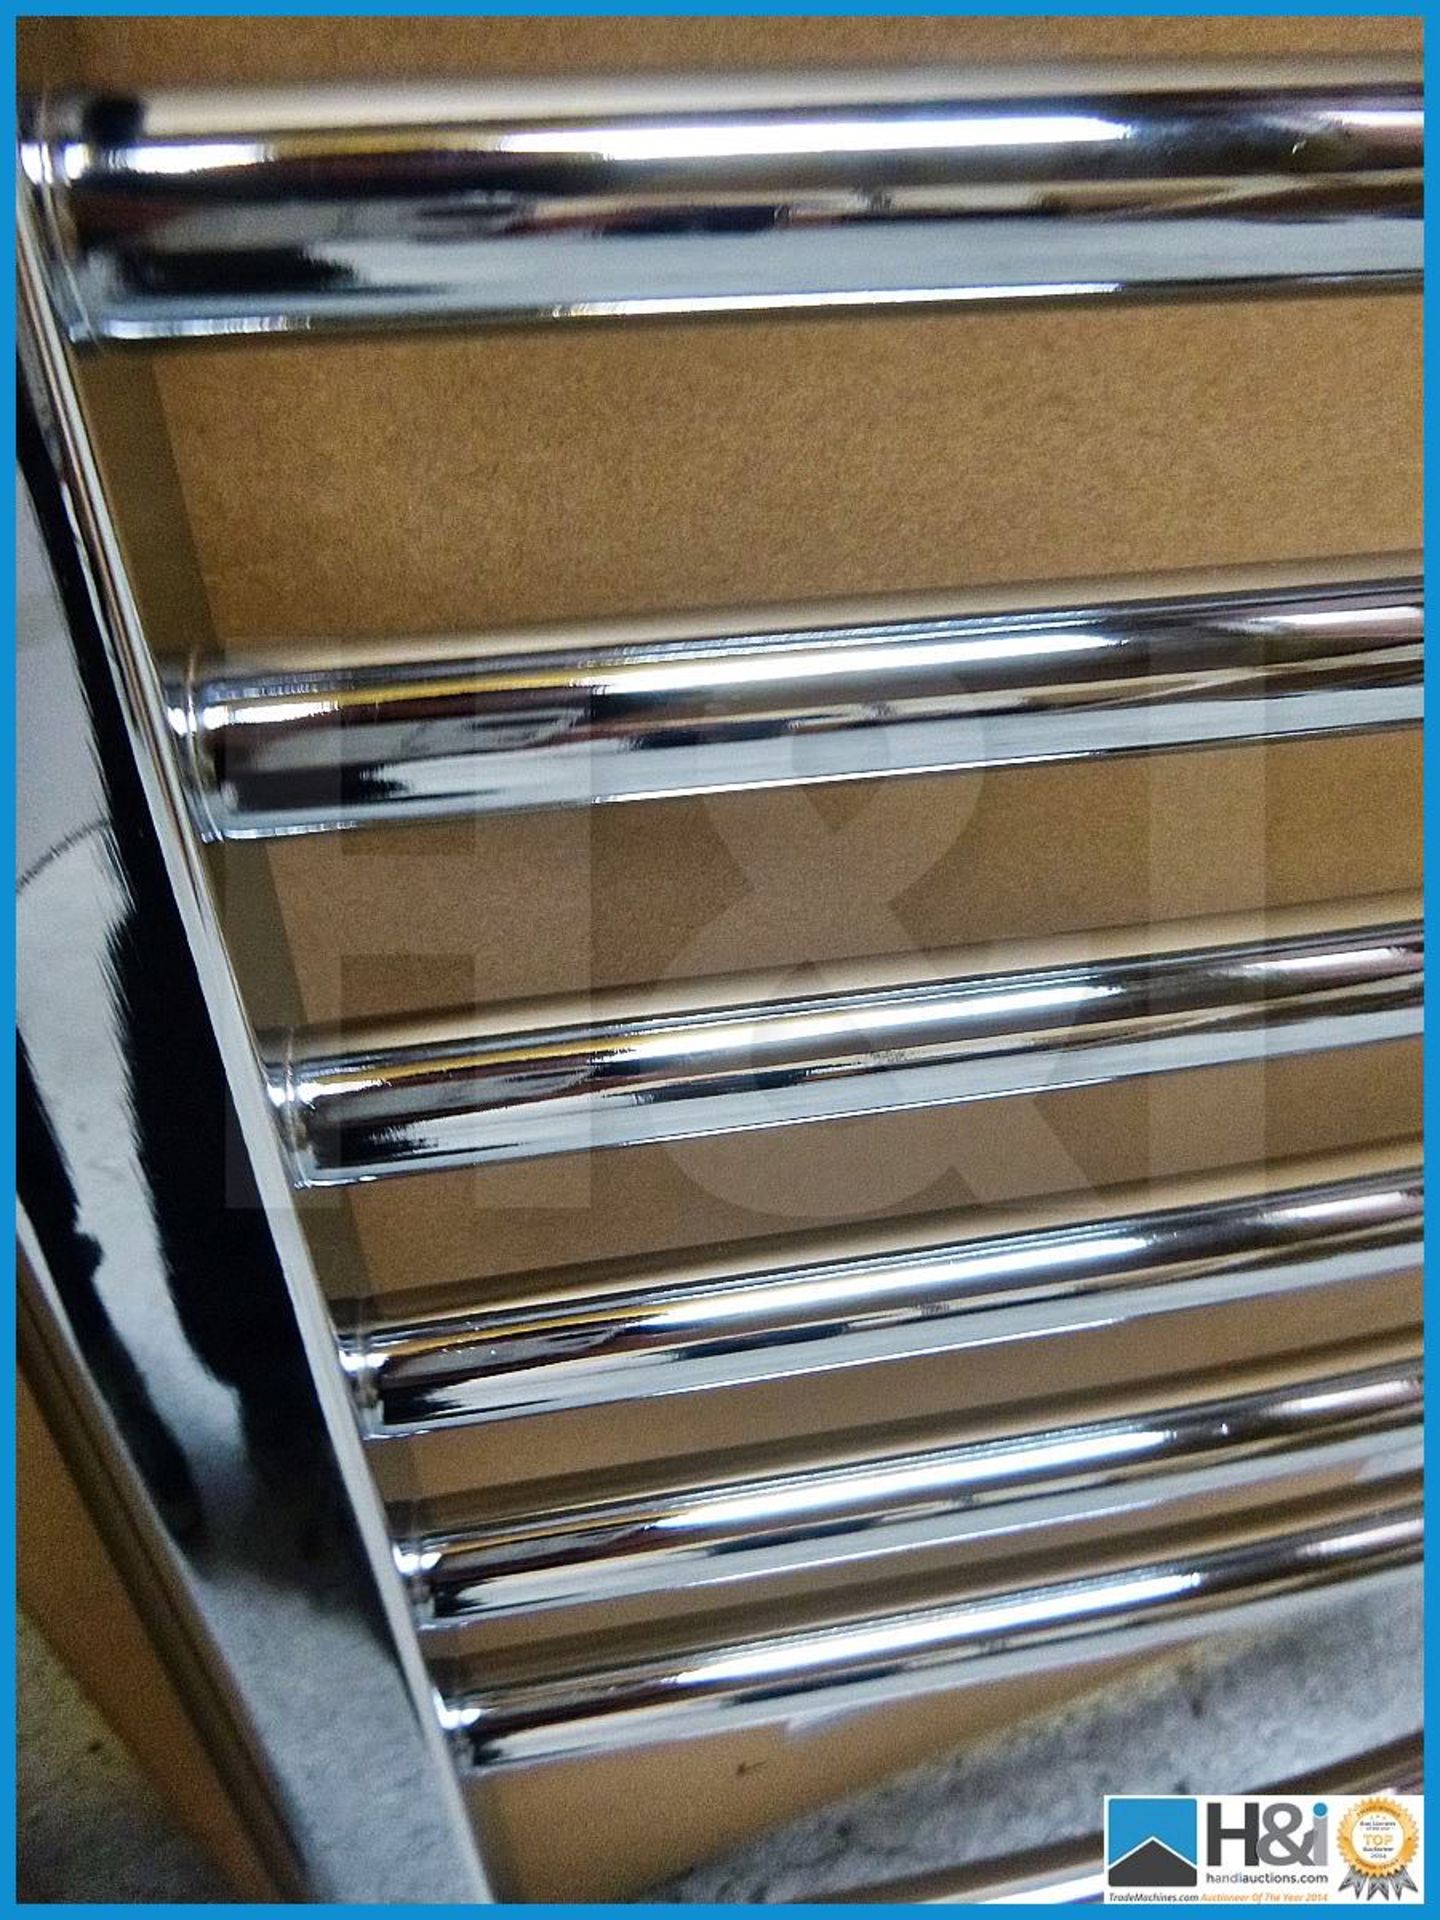 Chrome towel radiator 750X500mm Complete with fittings RRP 129 GBP - Image 3 of 5